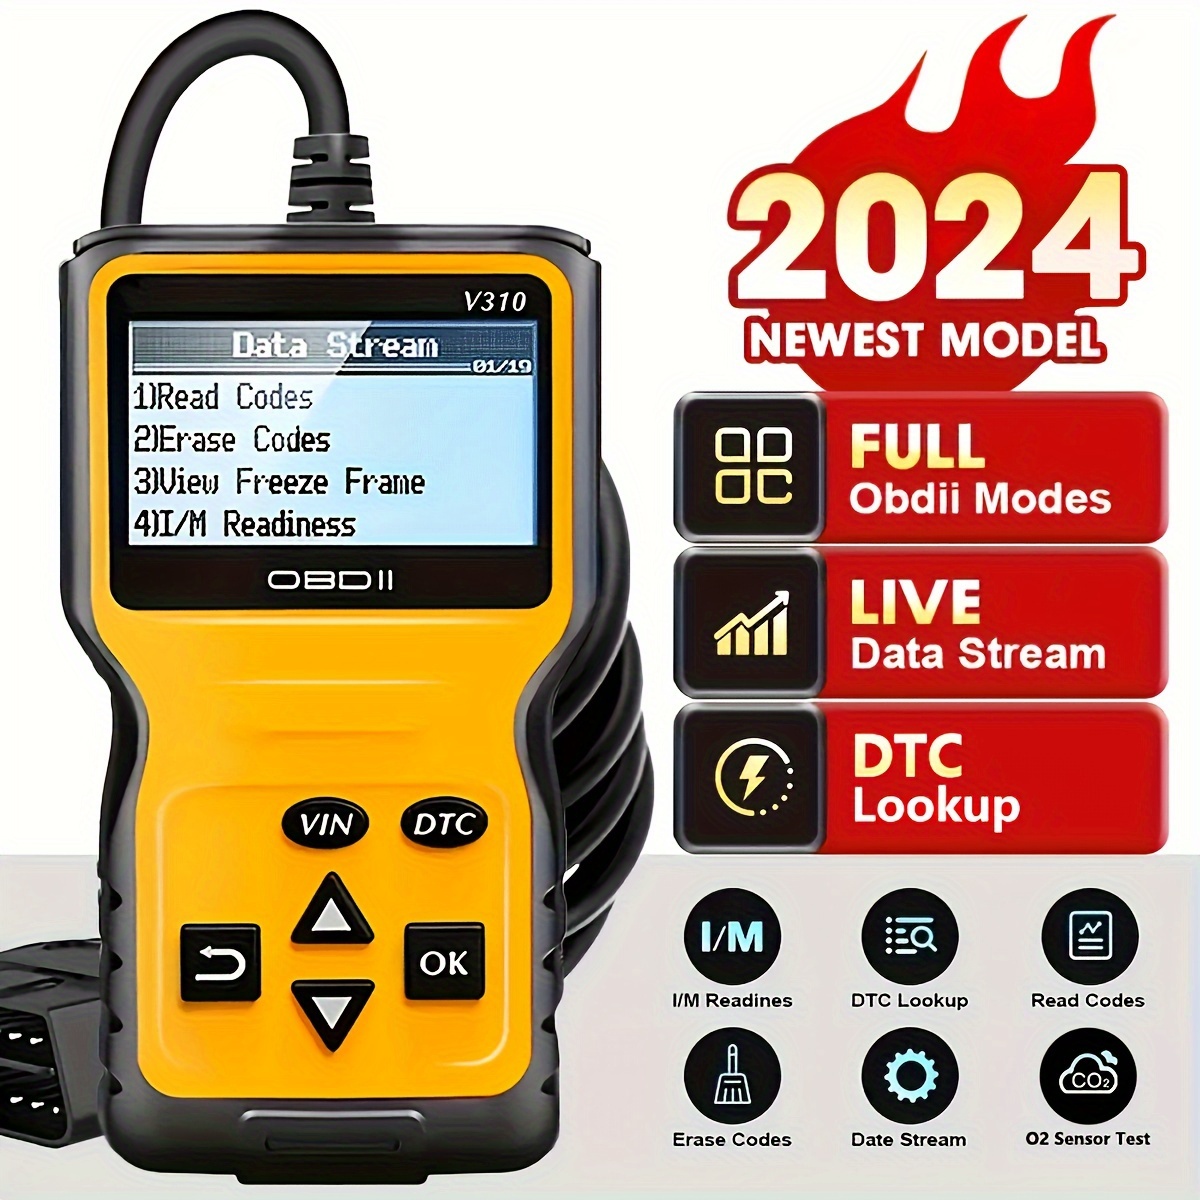 OBD-II Engine Code Reader with Bluetooth® Technology